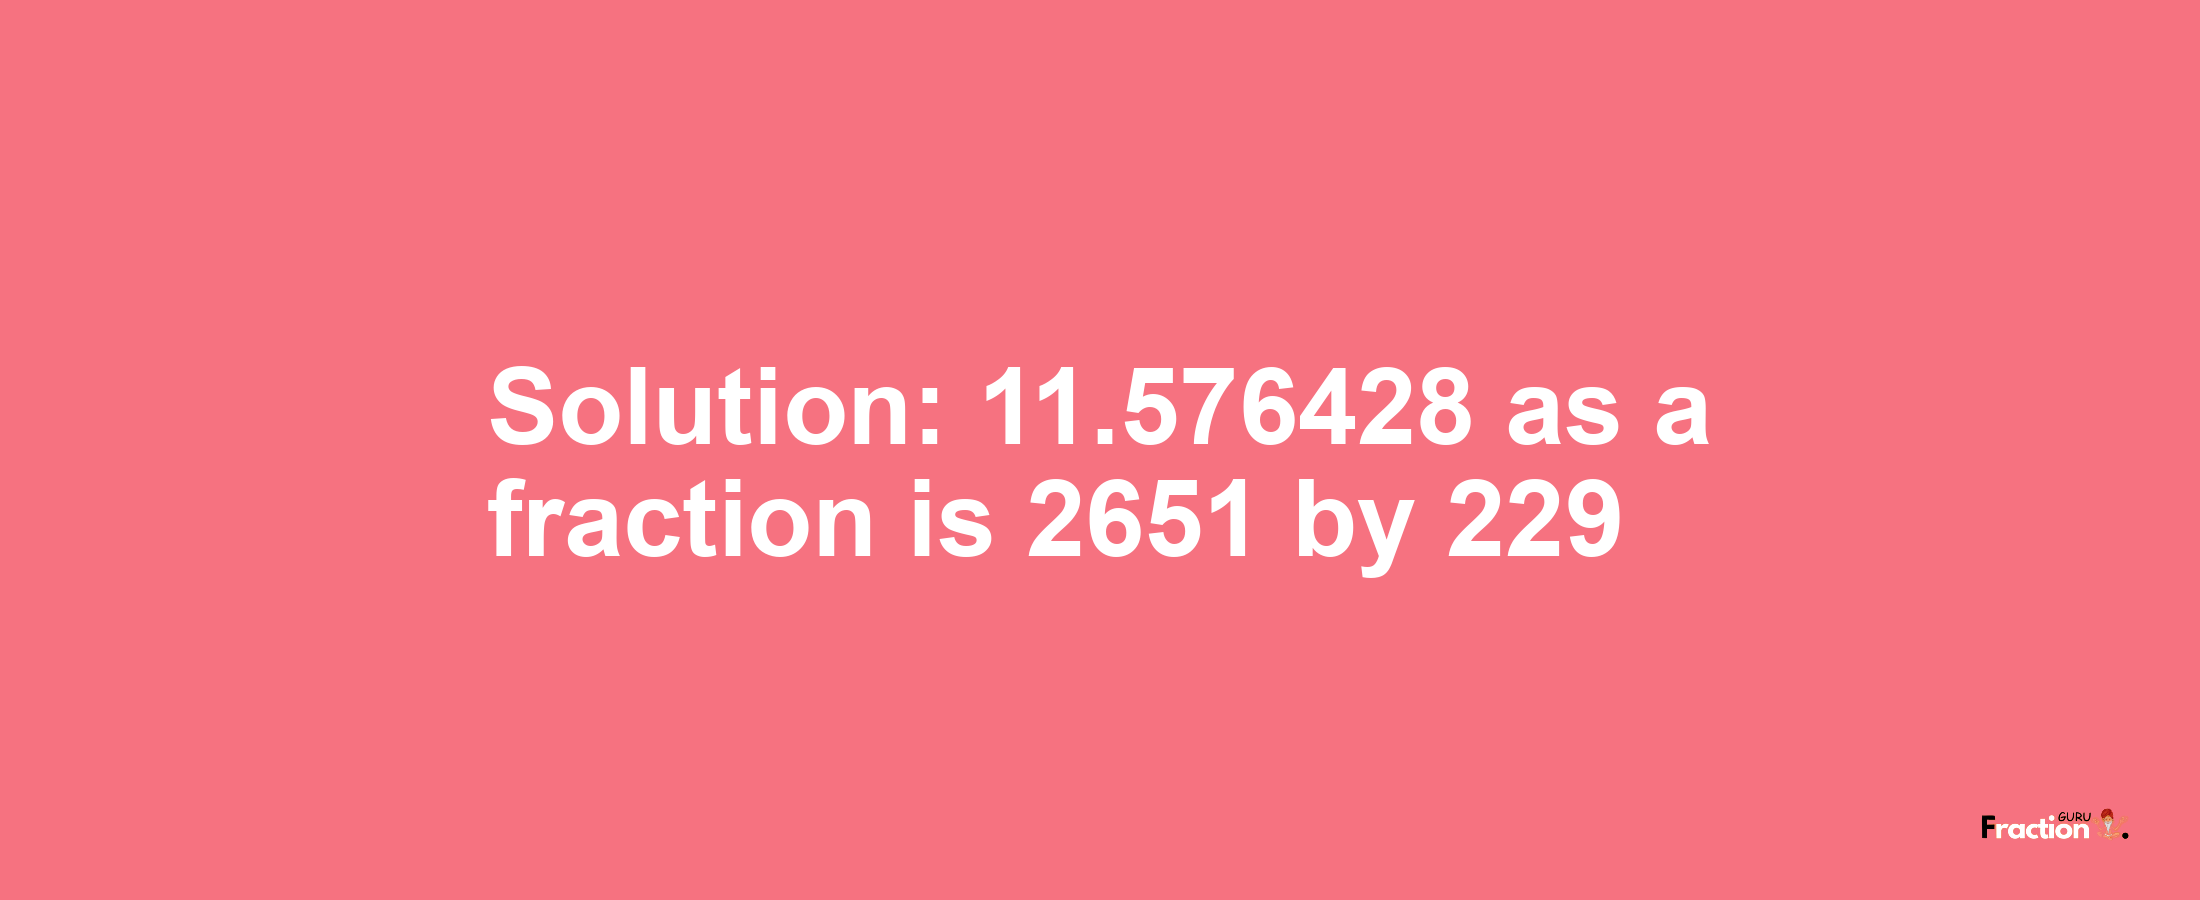 Solution:11.576428 as a fraction is 2651/229